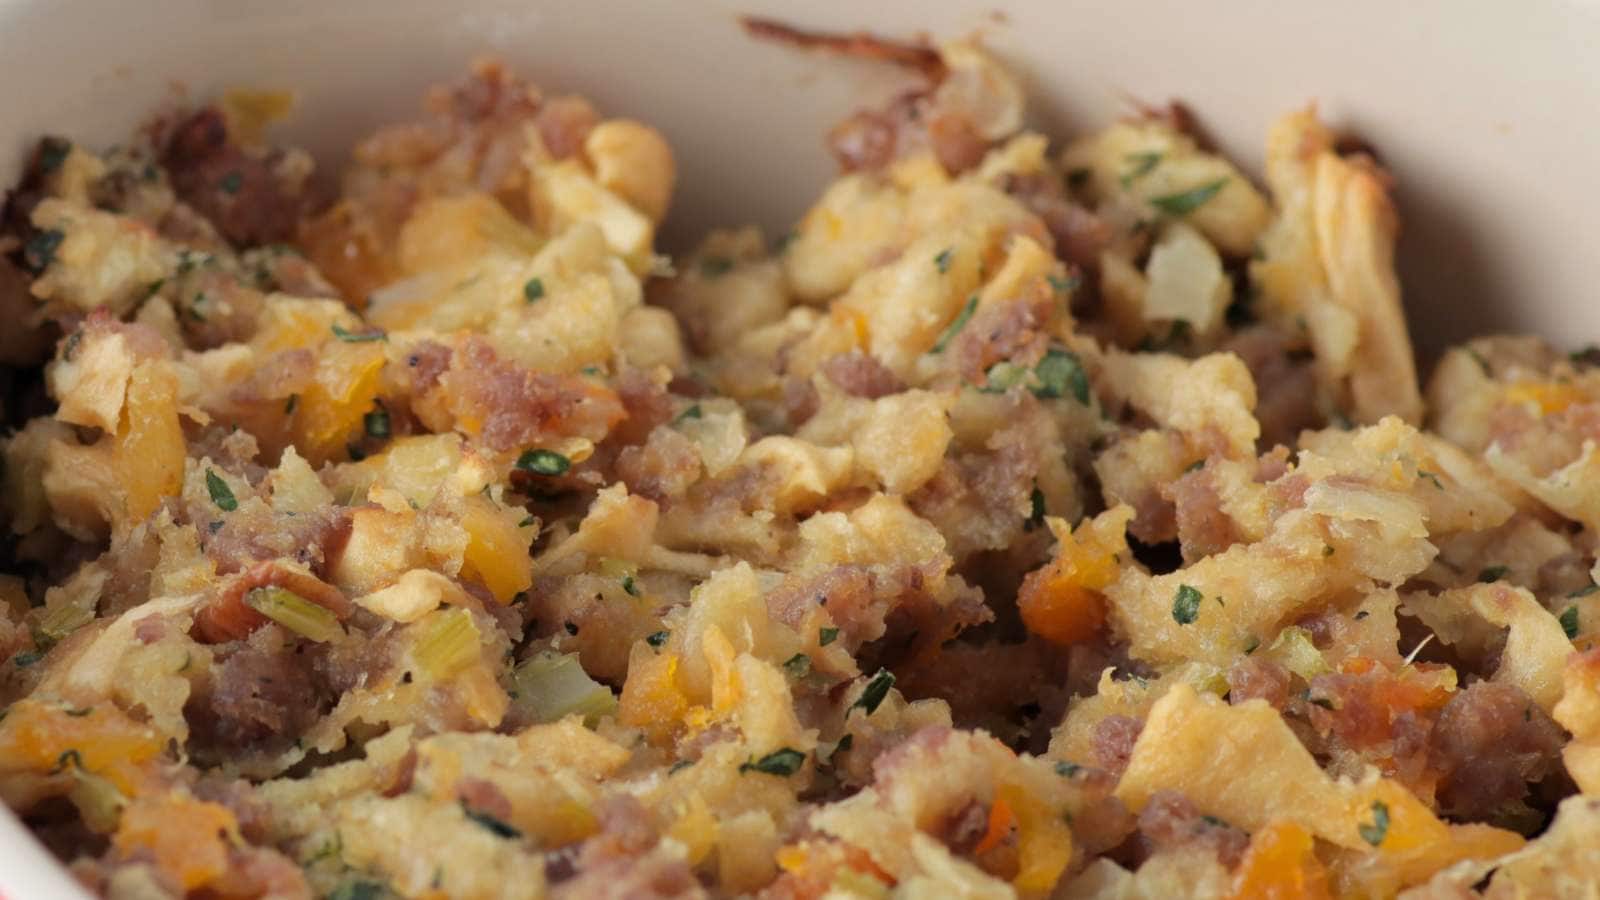 Stuffing recipe by Cheerful Cook.